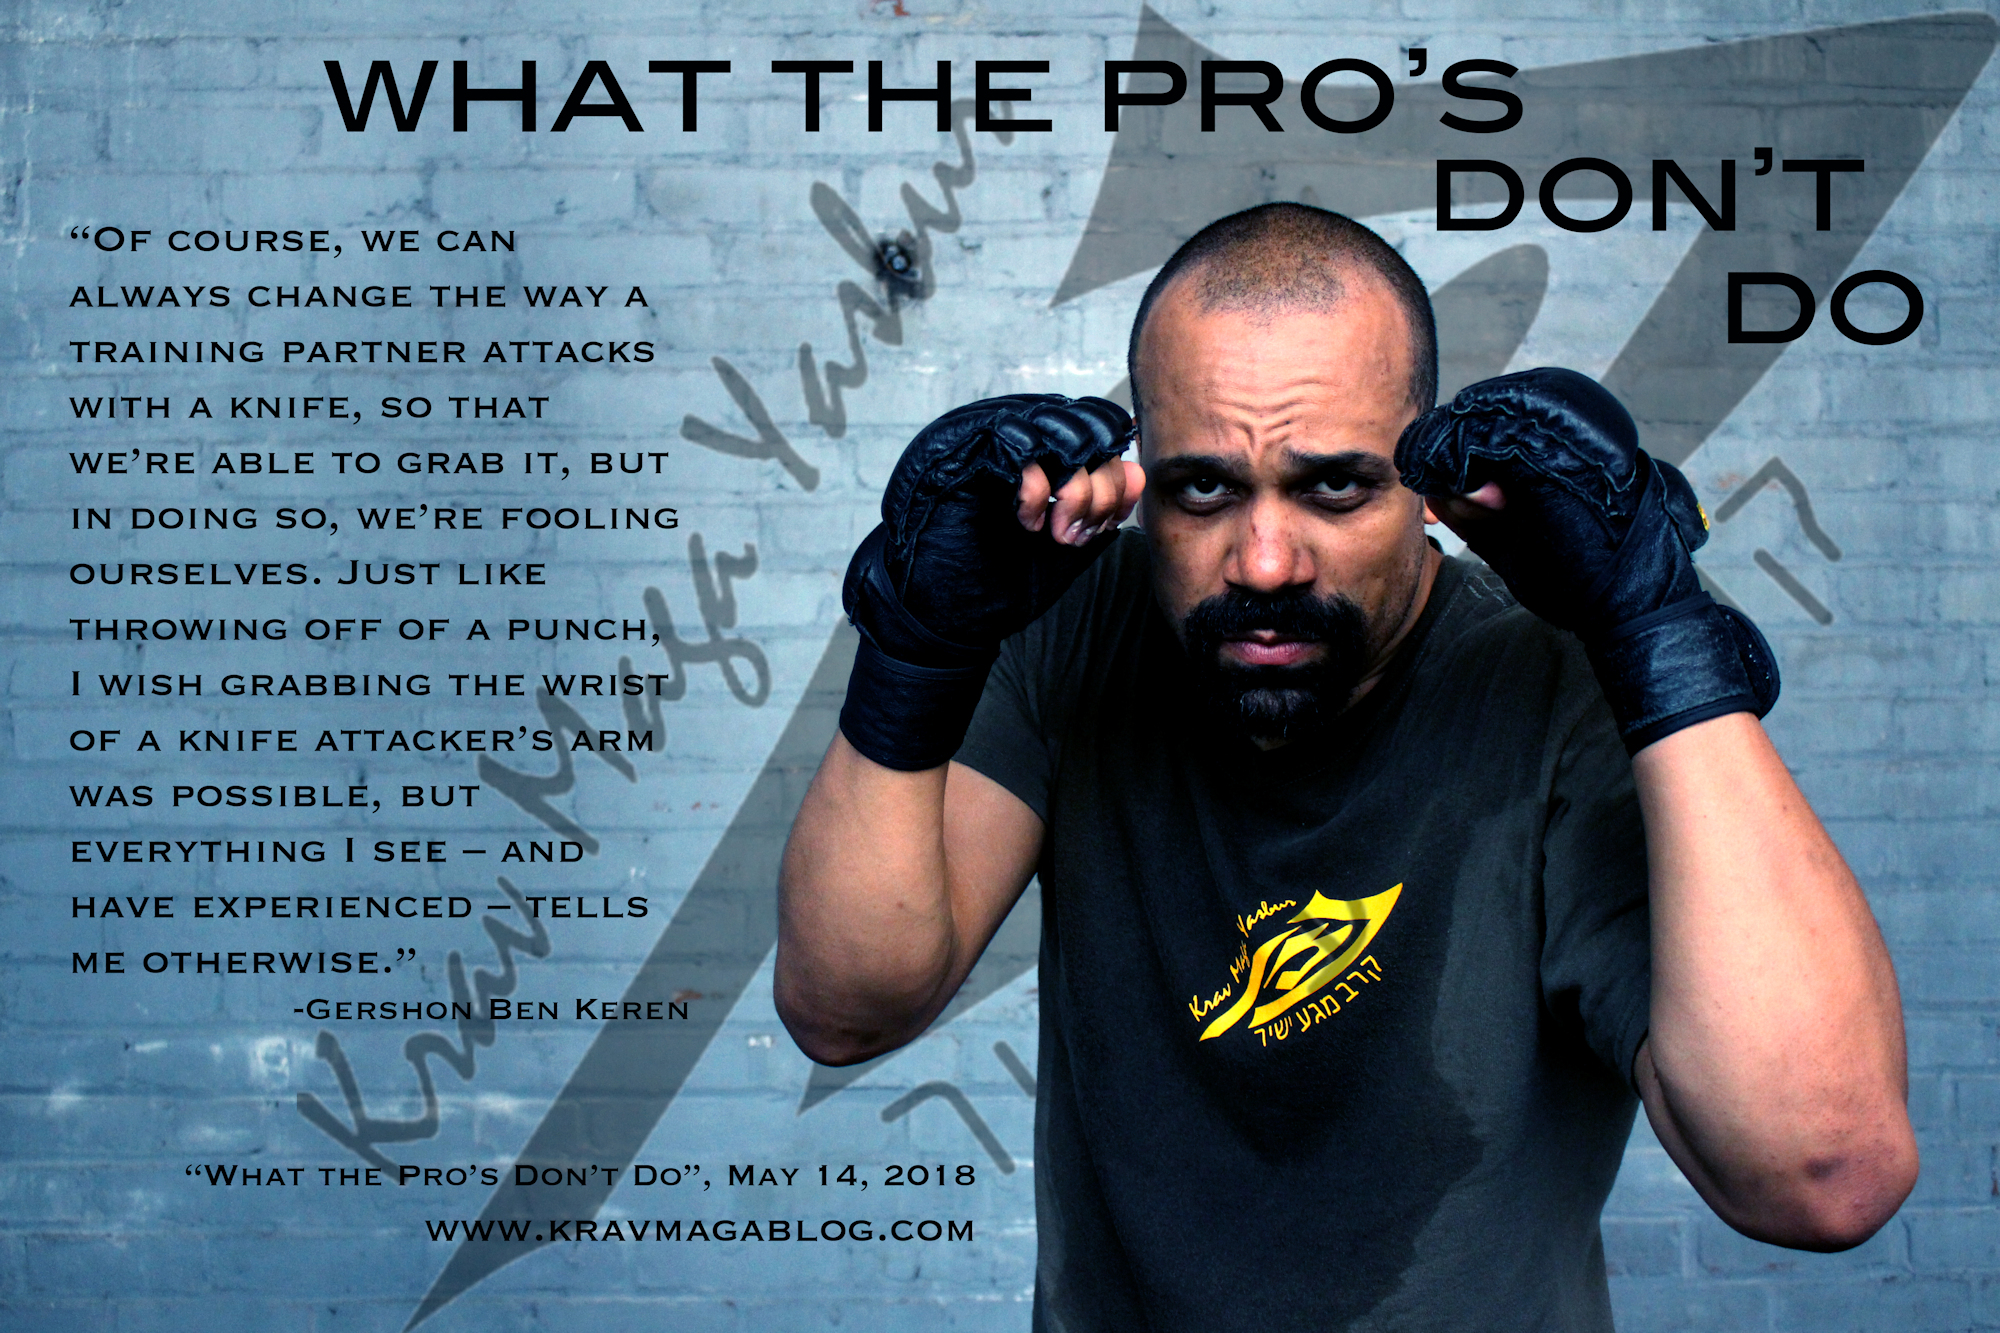 Blog About What The Pro's Don't Do